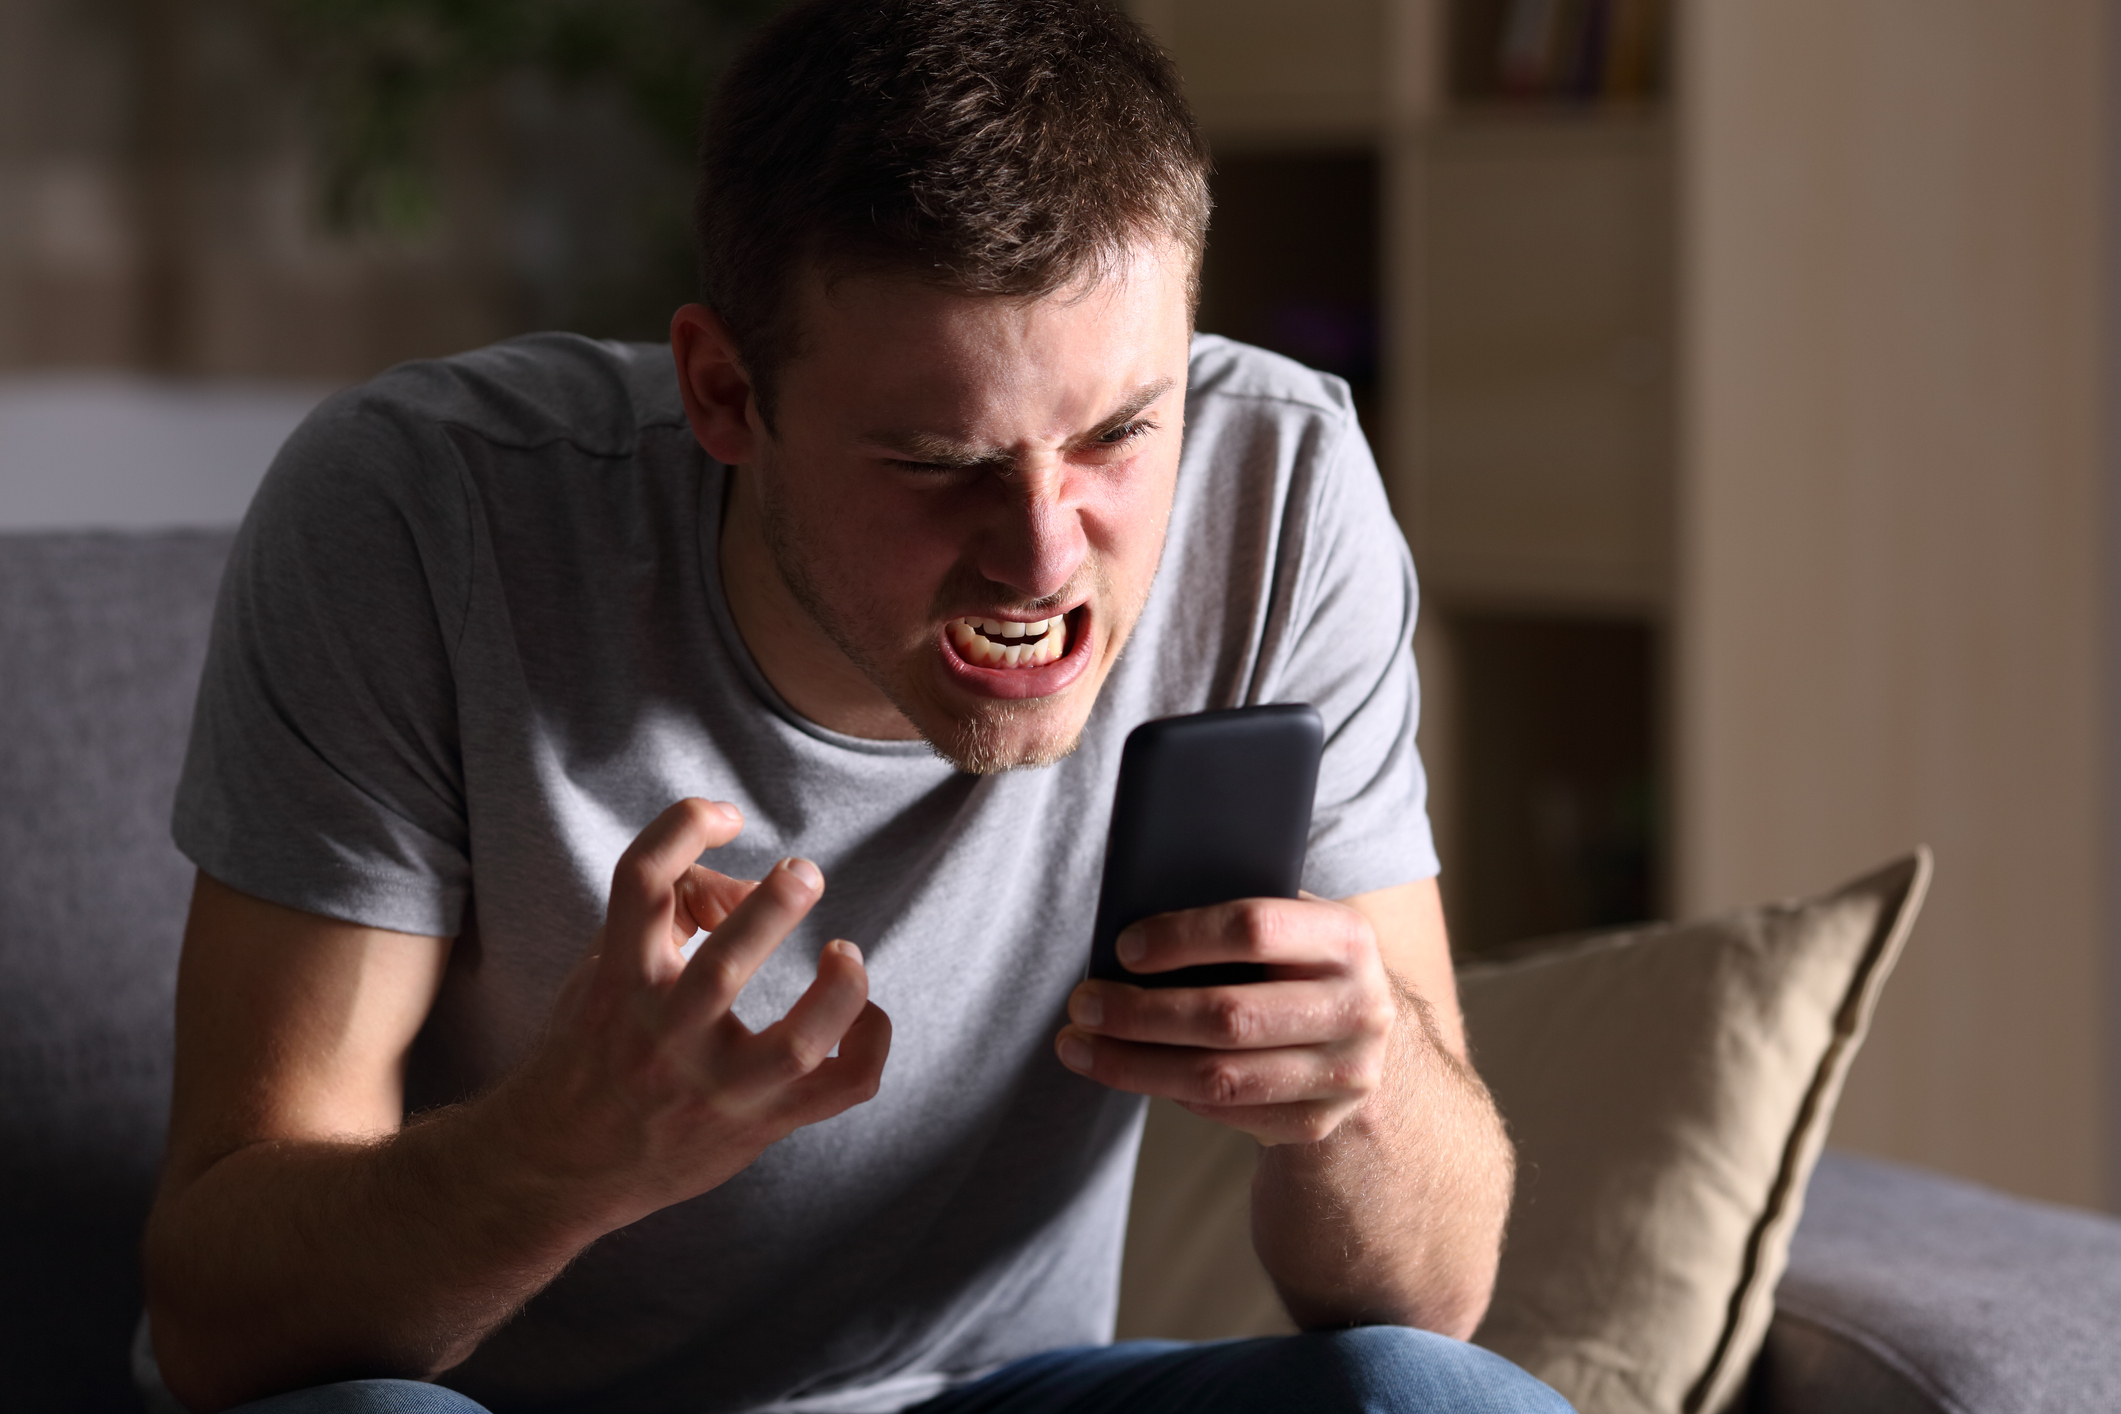 An angry patient caller sits on his couch at home and grimaces while yelling into a mobile phone in his hand.